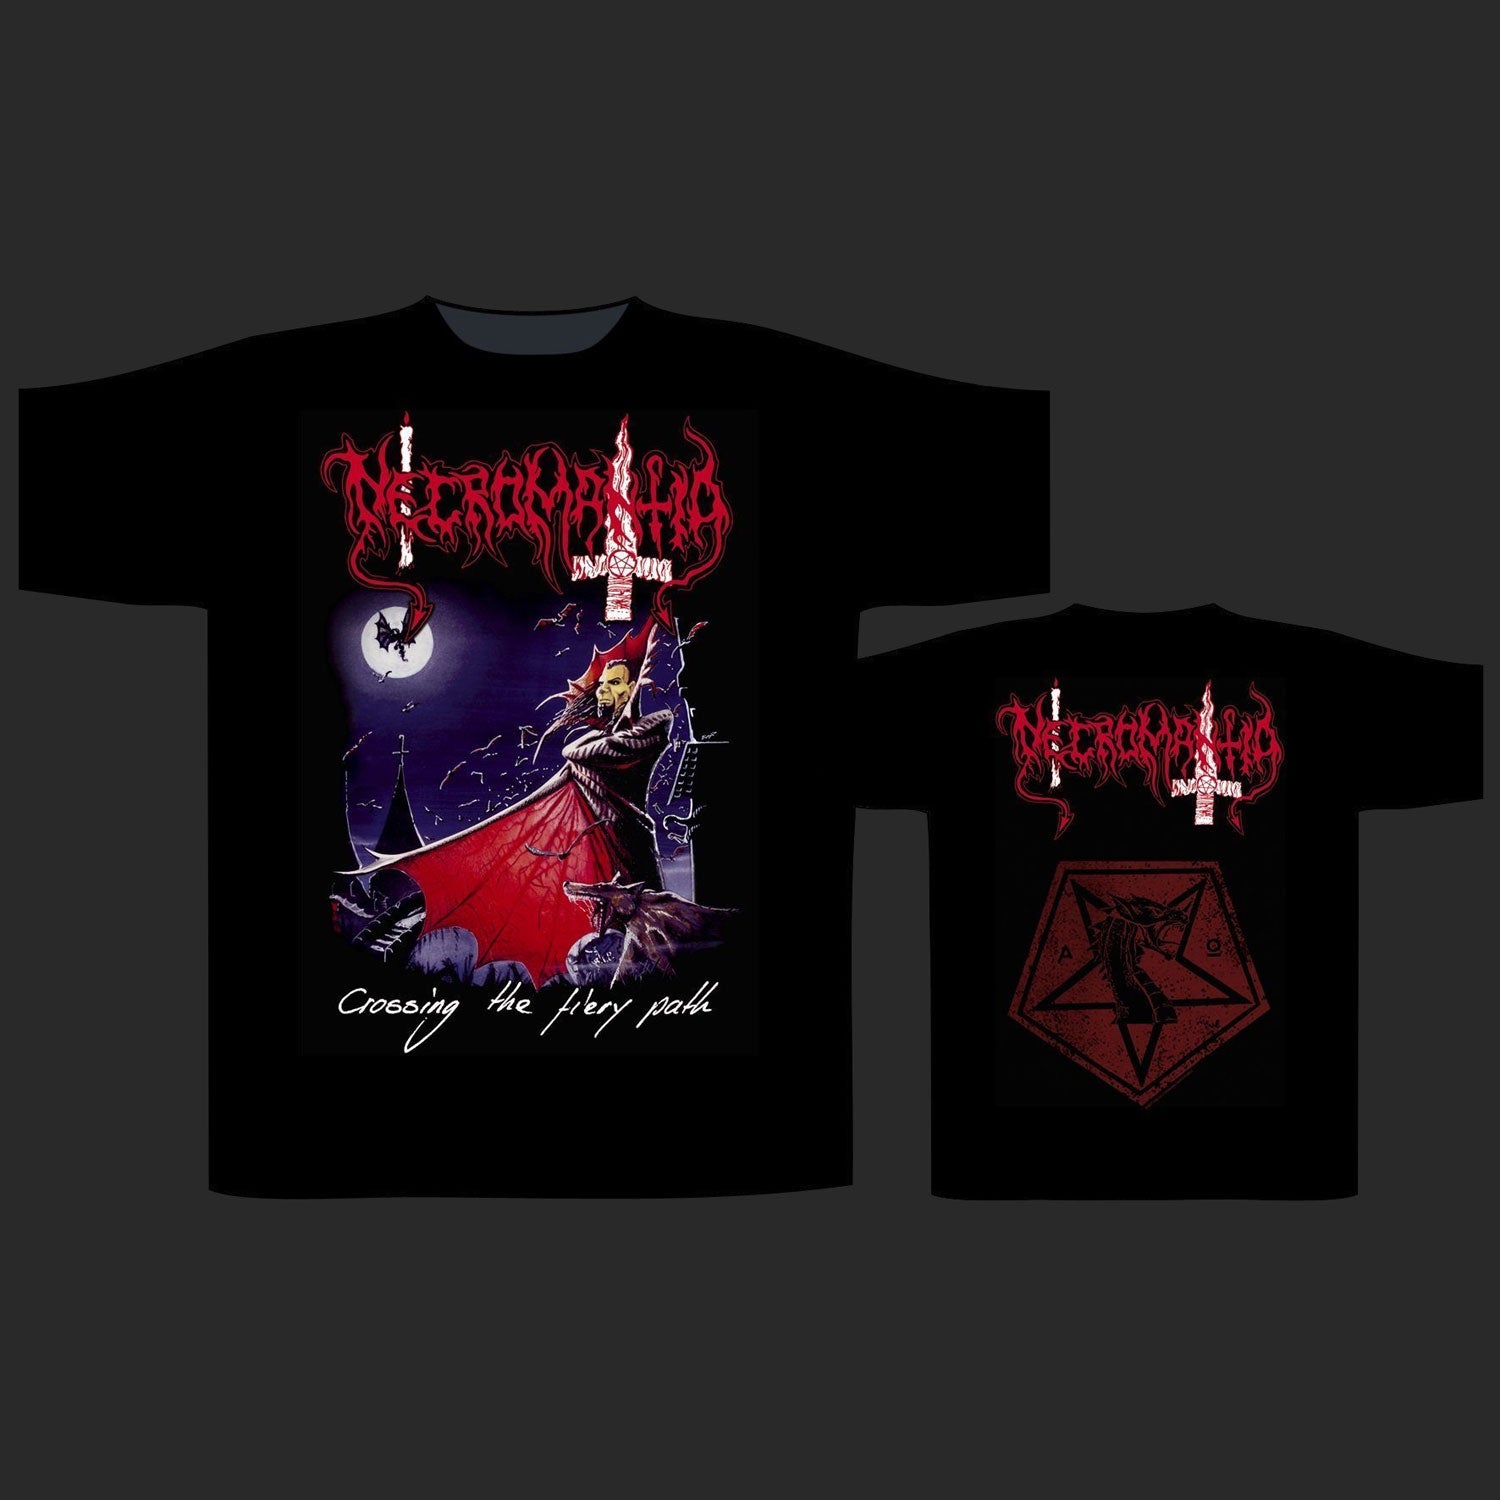 Necromantia - Crossing the Fiery Path (T-Shirt)